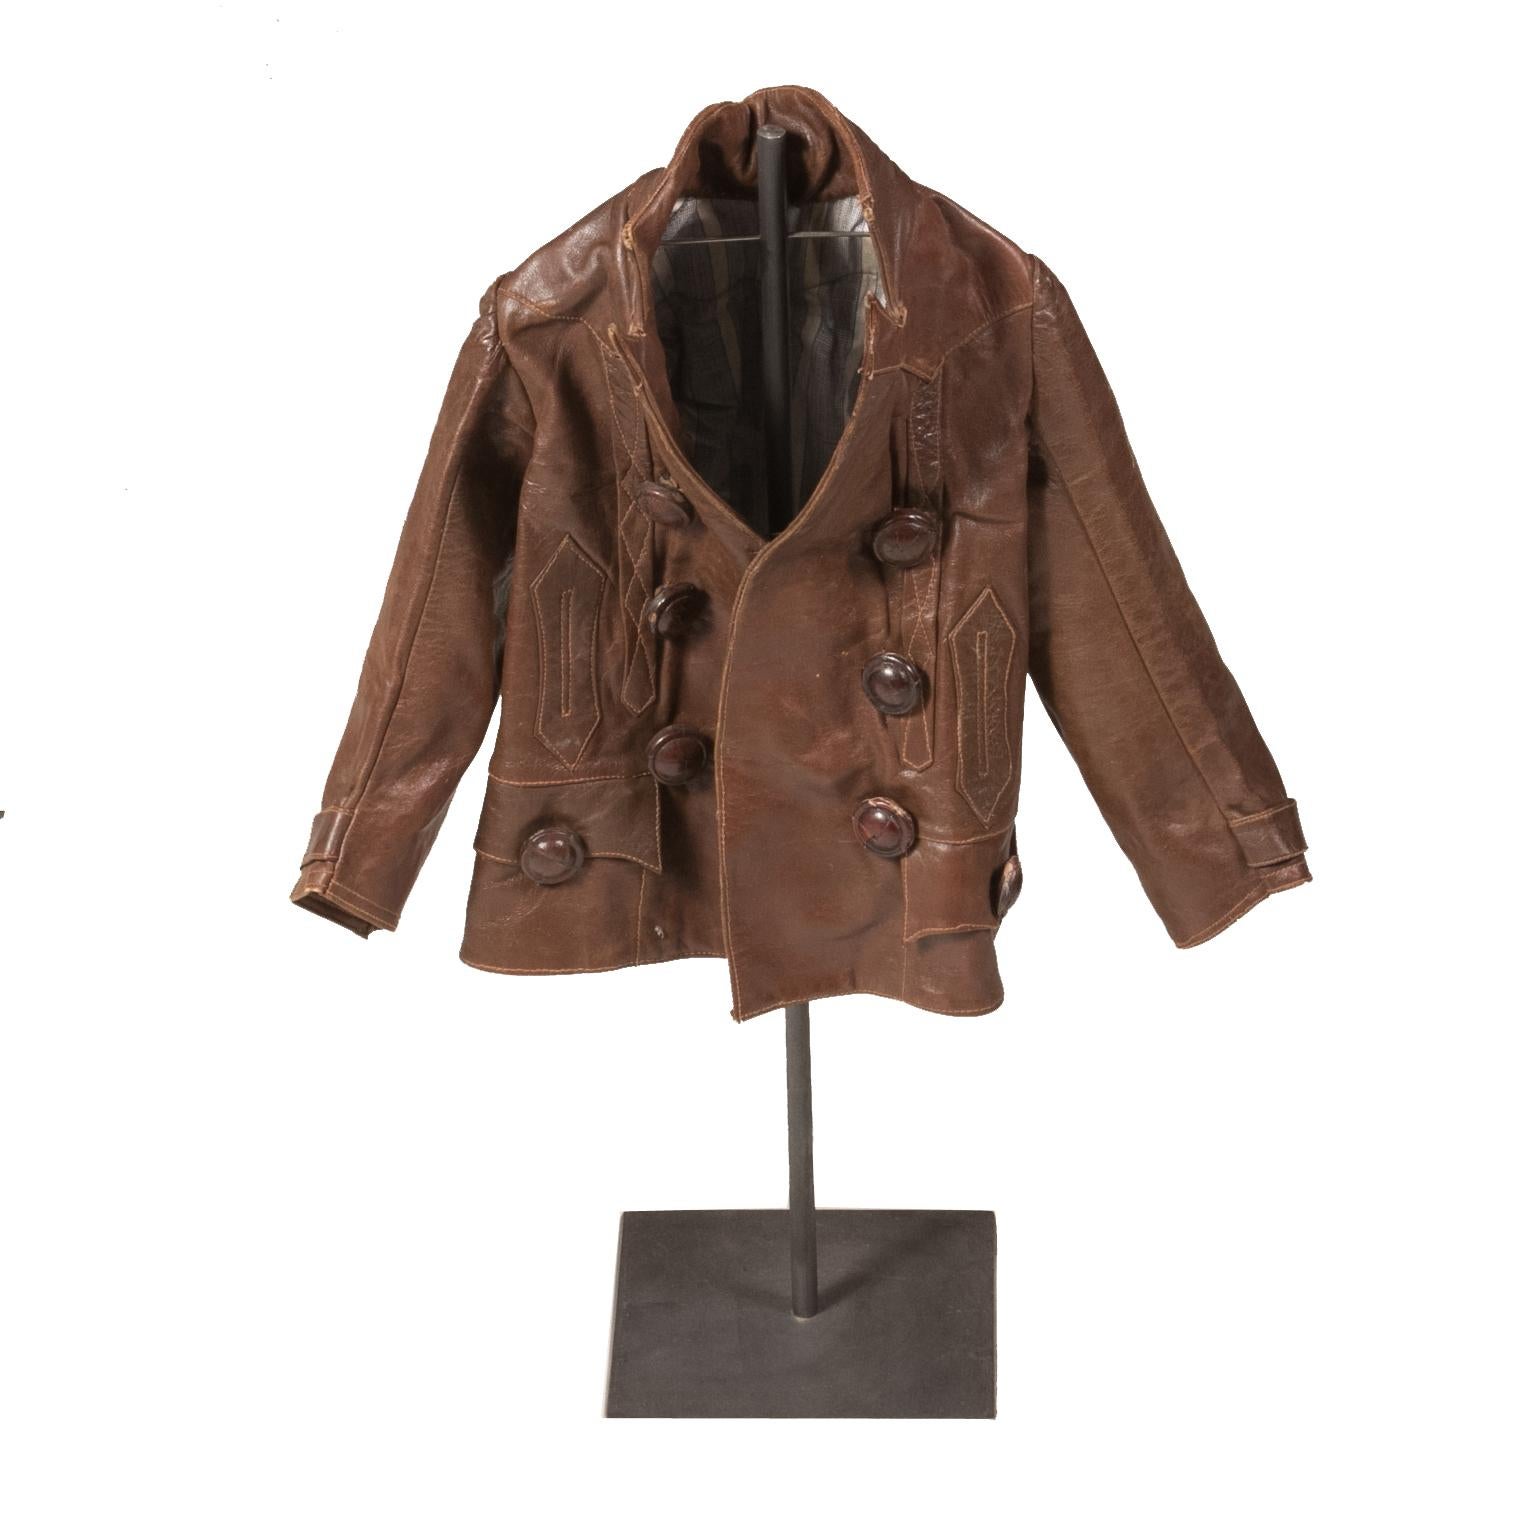 Child Leather Jacket Mounted on Metal Stand